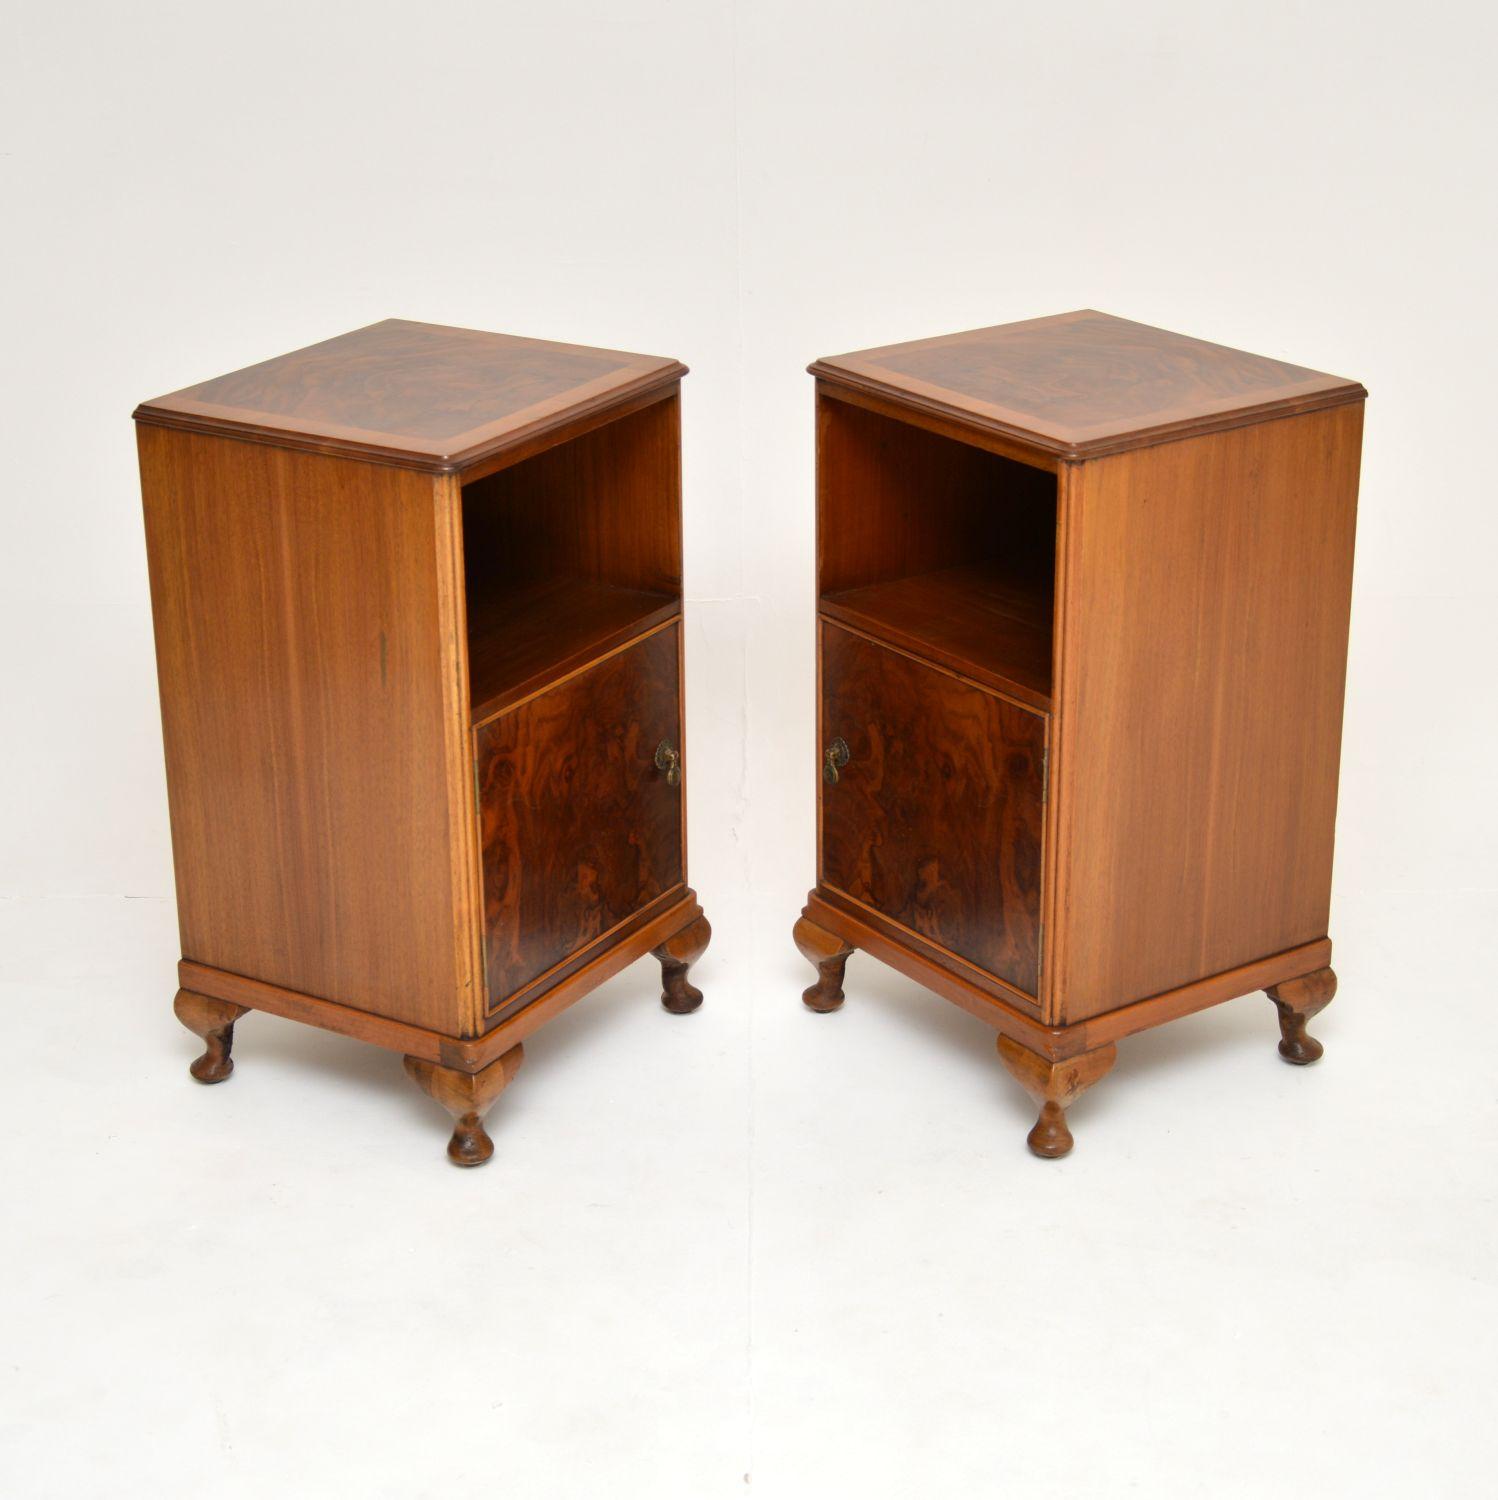 Queen Anne Pair of Antique Figured Walnut Bedside Cabinets